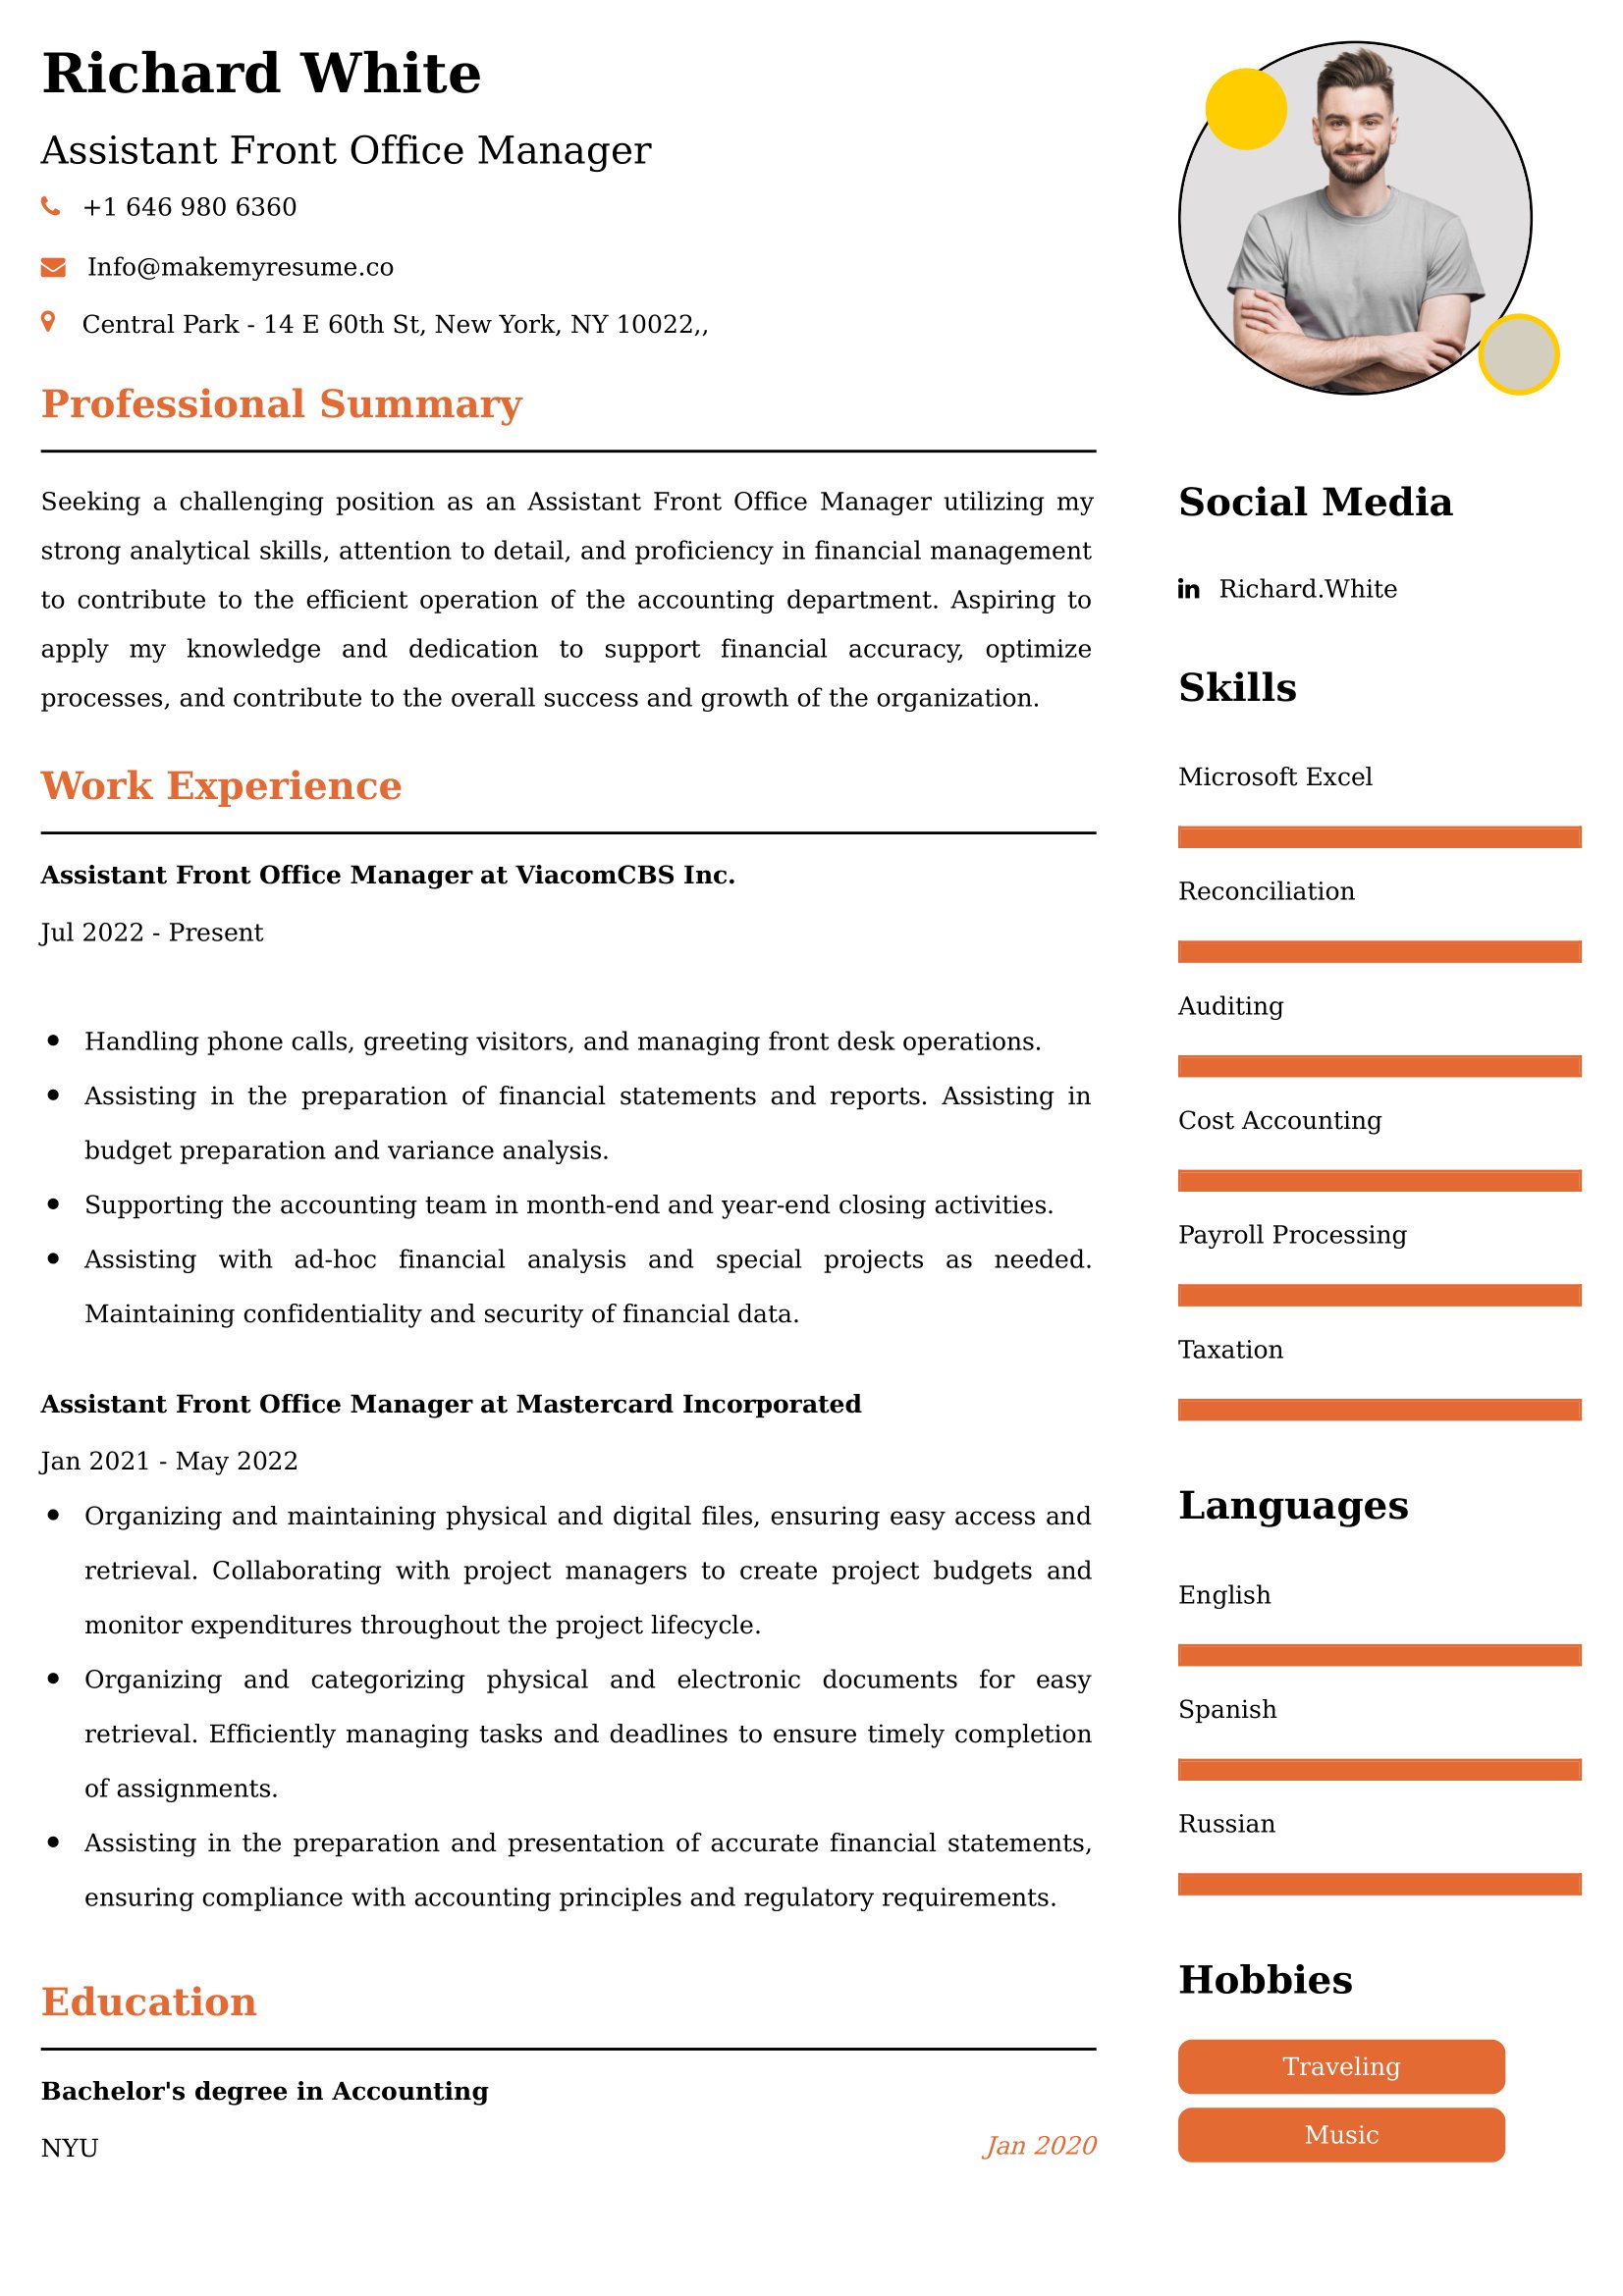 Assistant Front Office Manager CV Examples - US Format